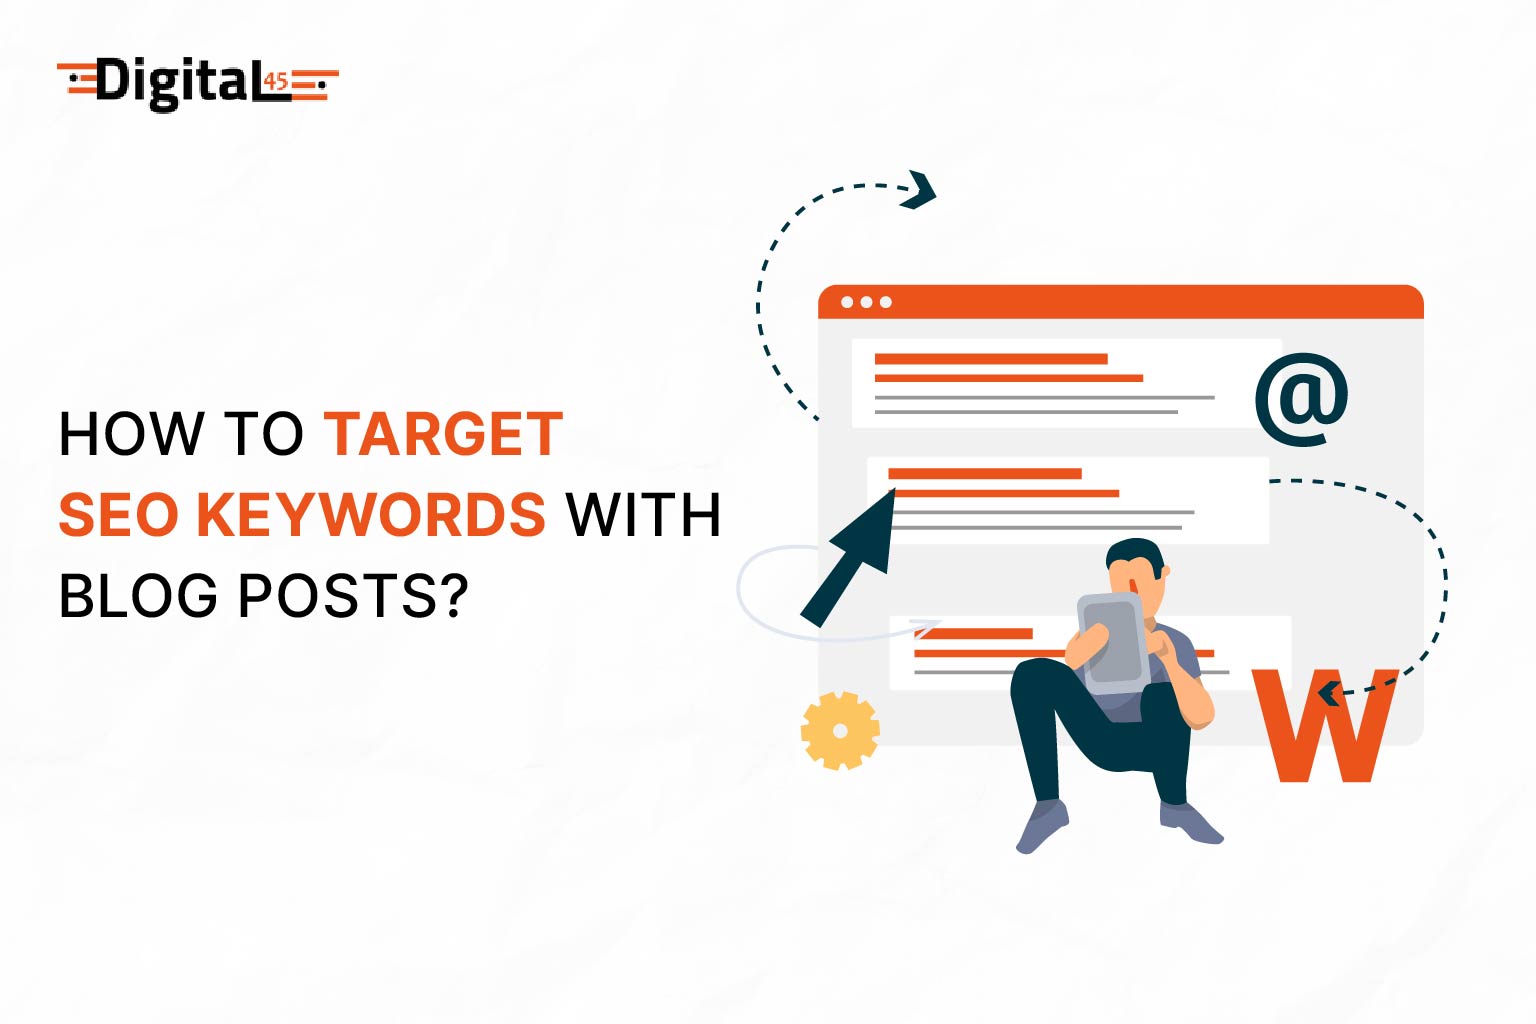 How to Target SEO Keywords with Blog Posts